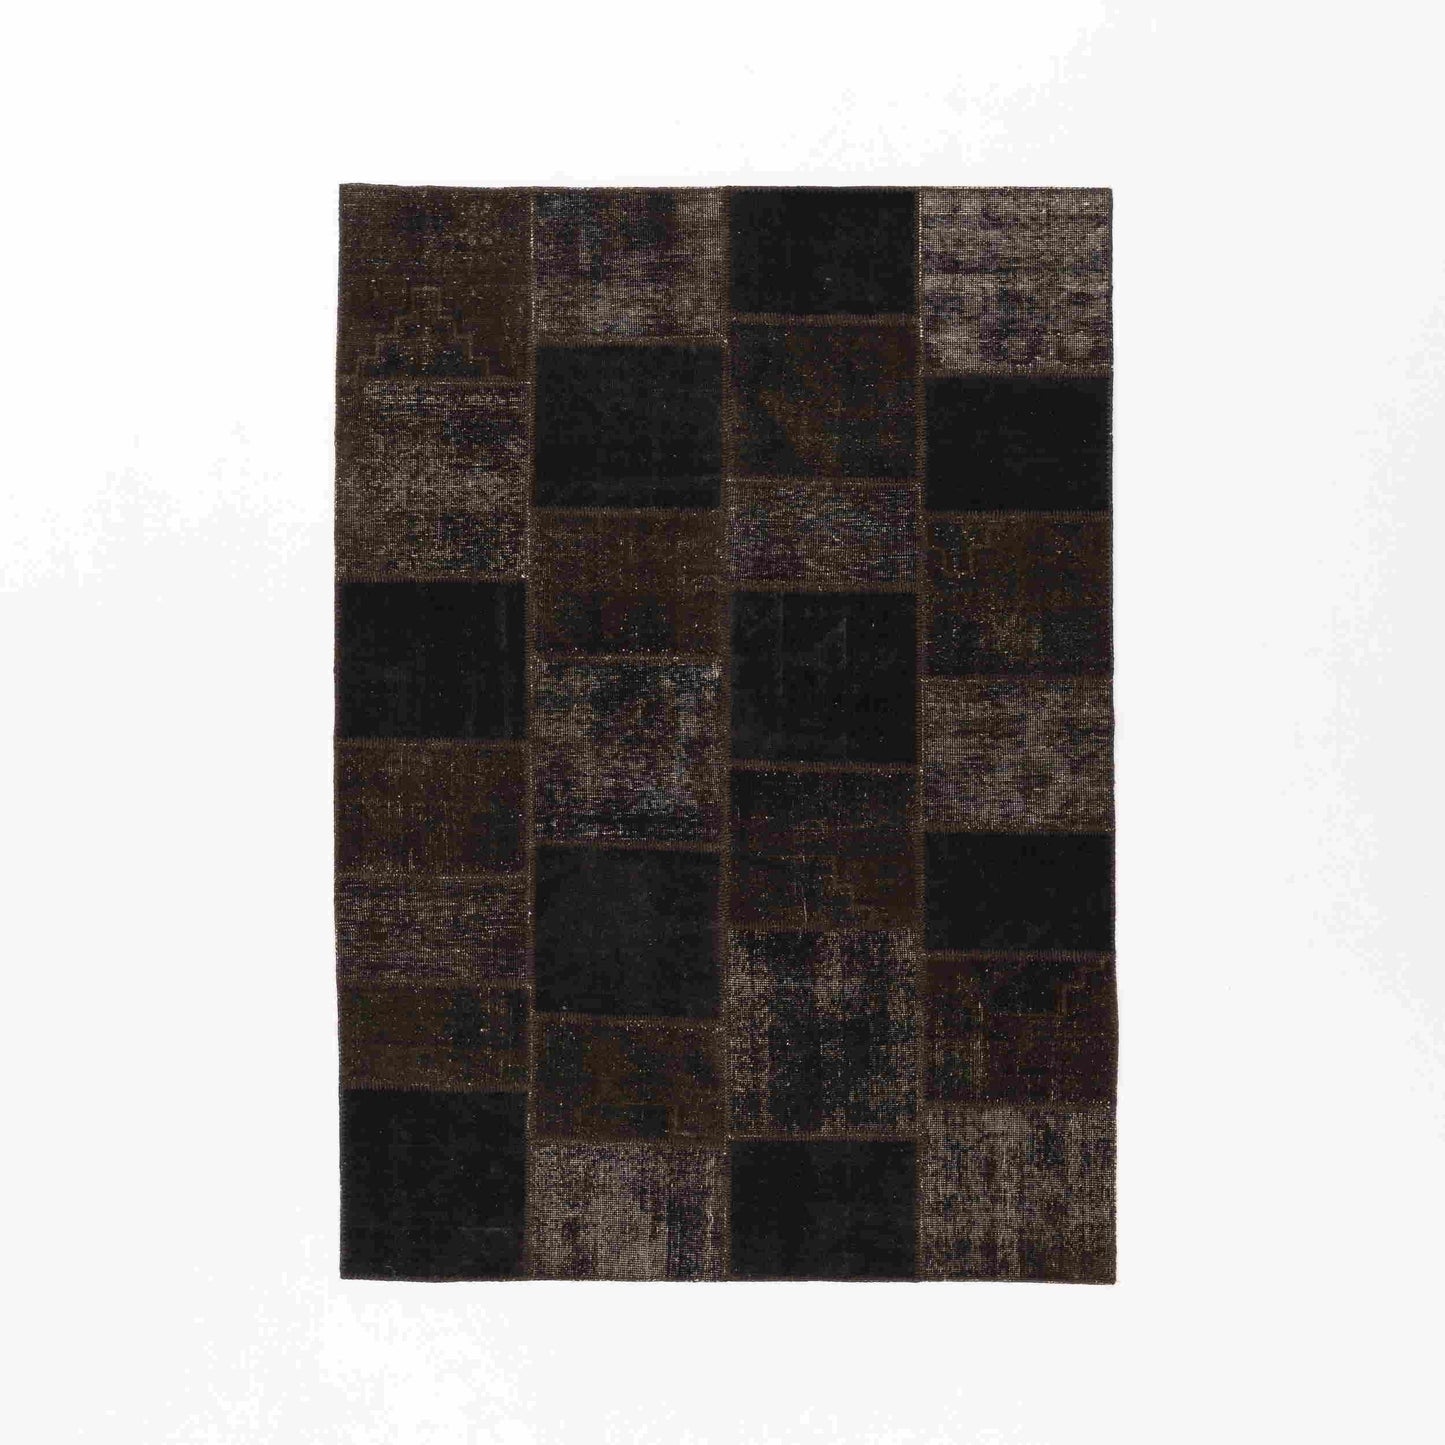 Oriental Rug Patchwork Hand Knotted Wool On Wool 172 x 243 Cm - 5' 8'' x 8' ER12